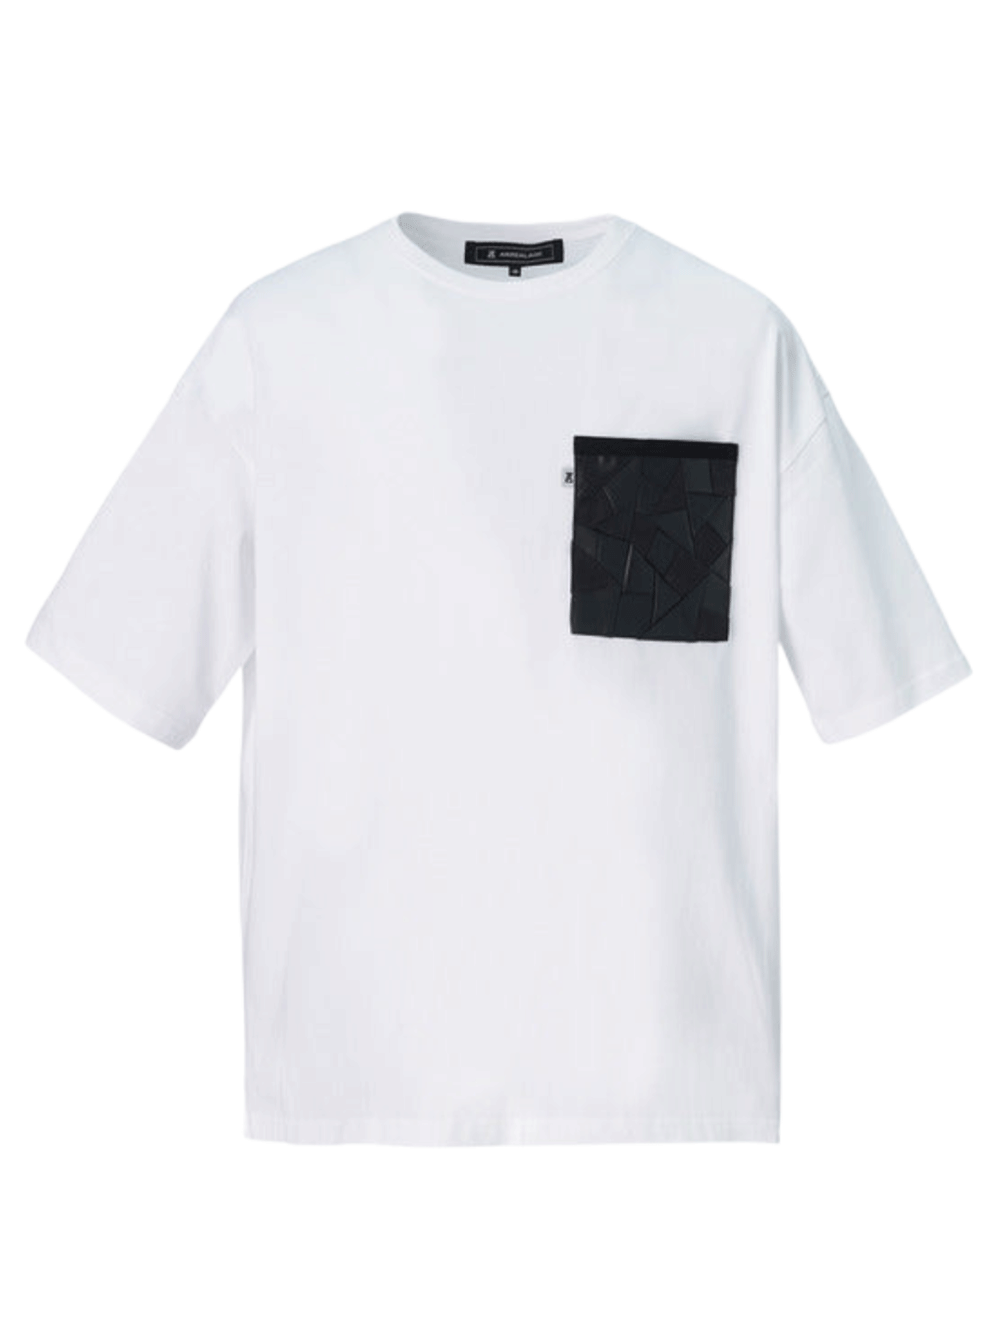 ANREALAGE-Patchwork-Pocket-T-Shirt-White-1